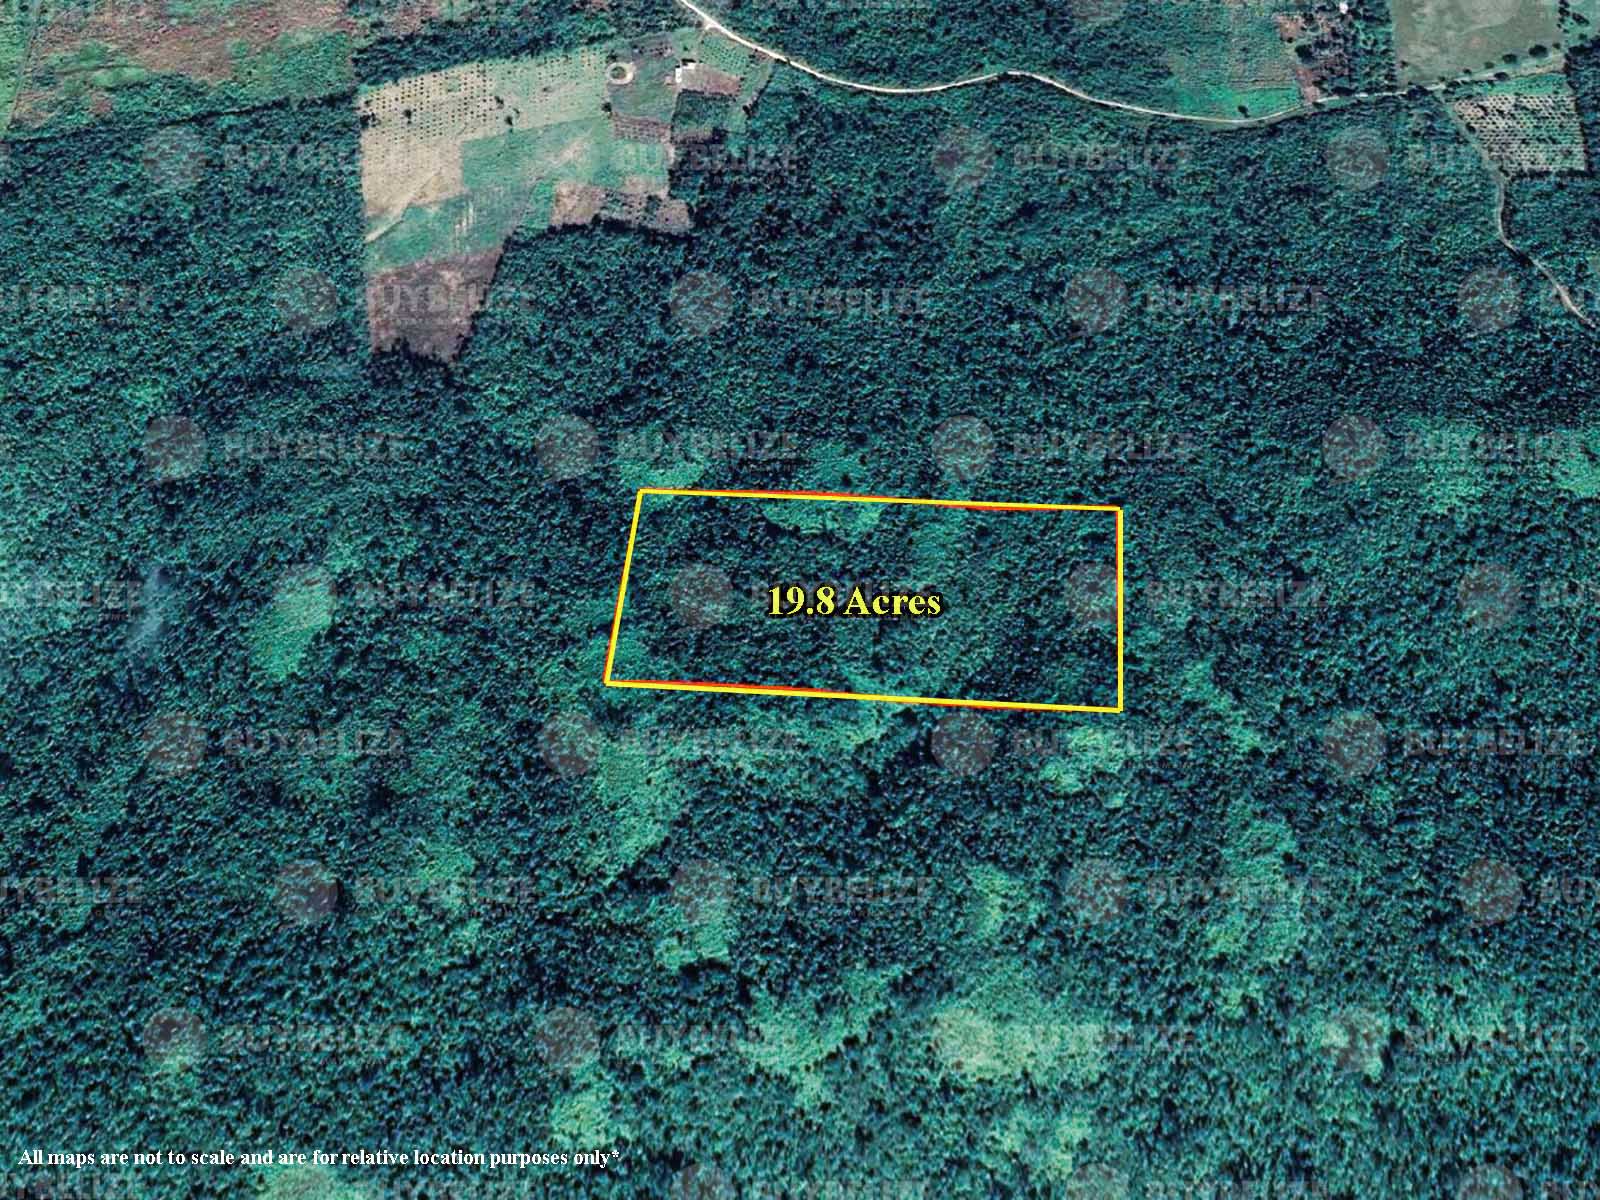 19.8 Acres Farm Land in Cayo District Belize for Sale